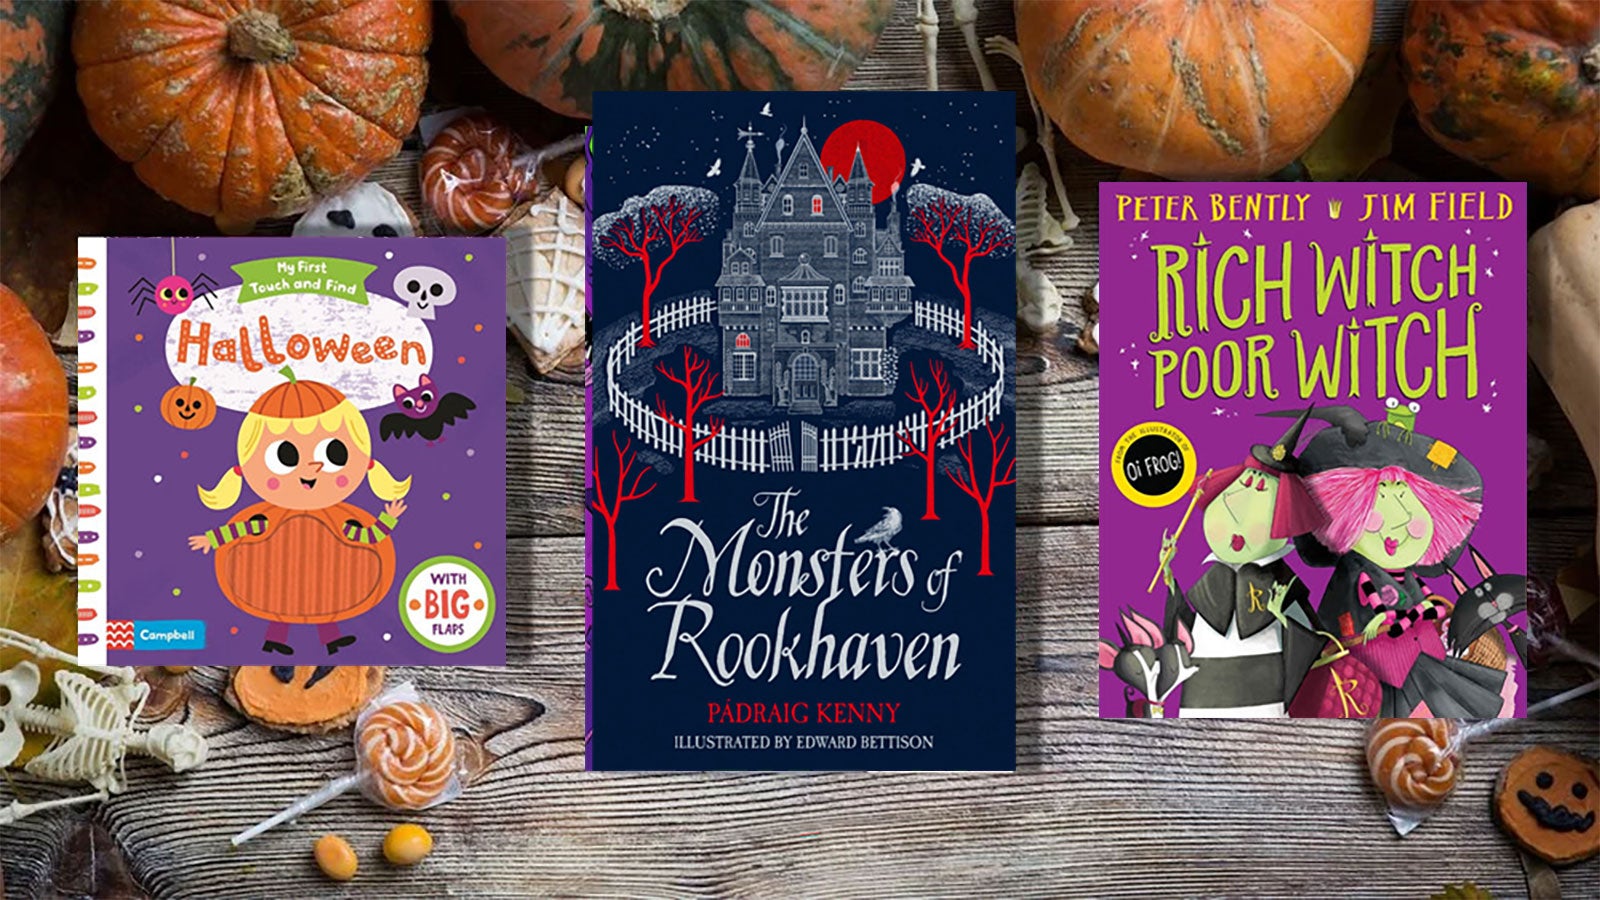 Halloween, The Monsters of Rookhaven and Rich Witch, Poor Witch against a background of pumpkins and sweets